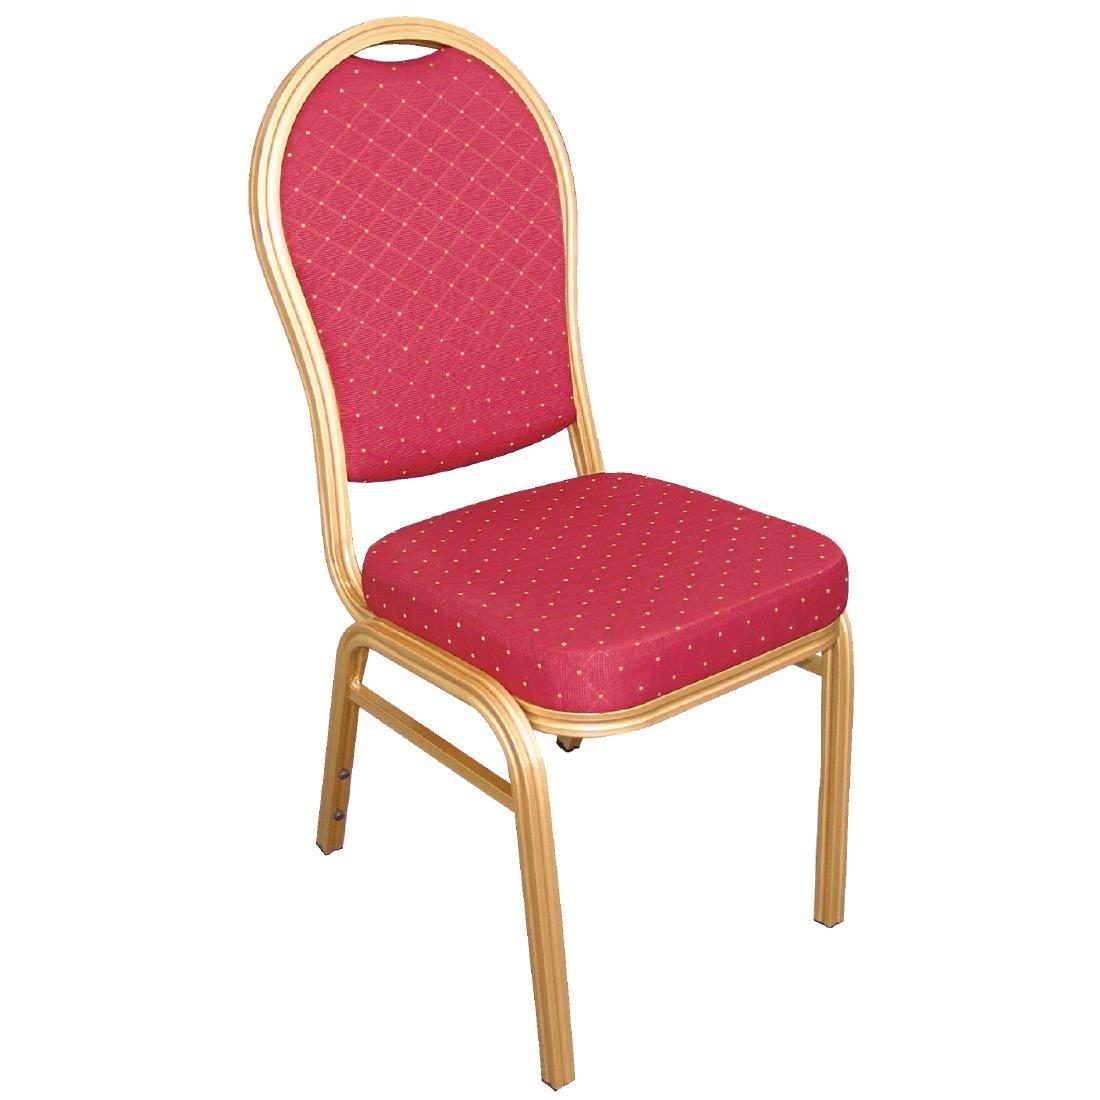 Bolero Arched Back Banquet Chairs Red & Gold (Pack of 4) - U525  - 1